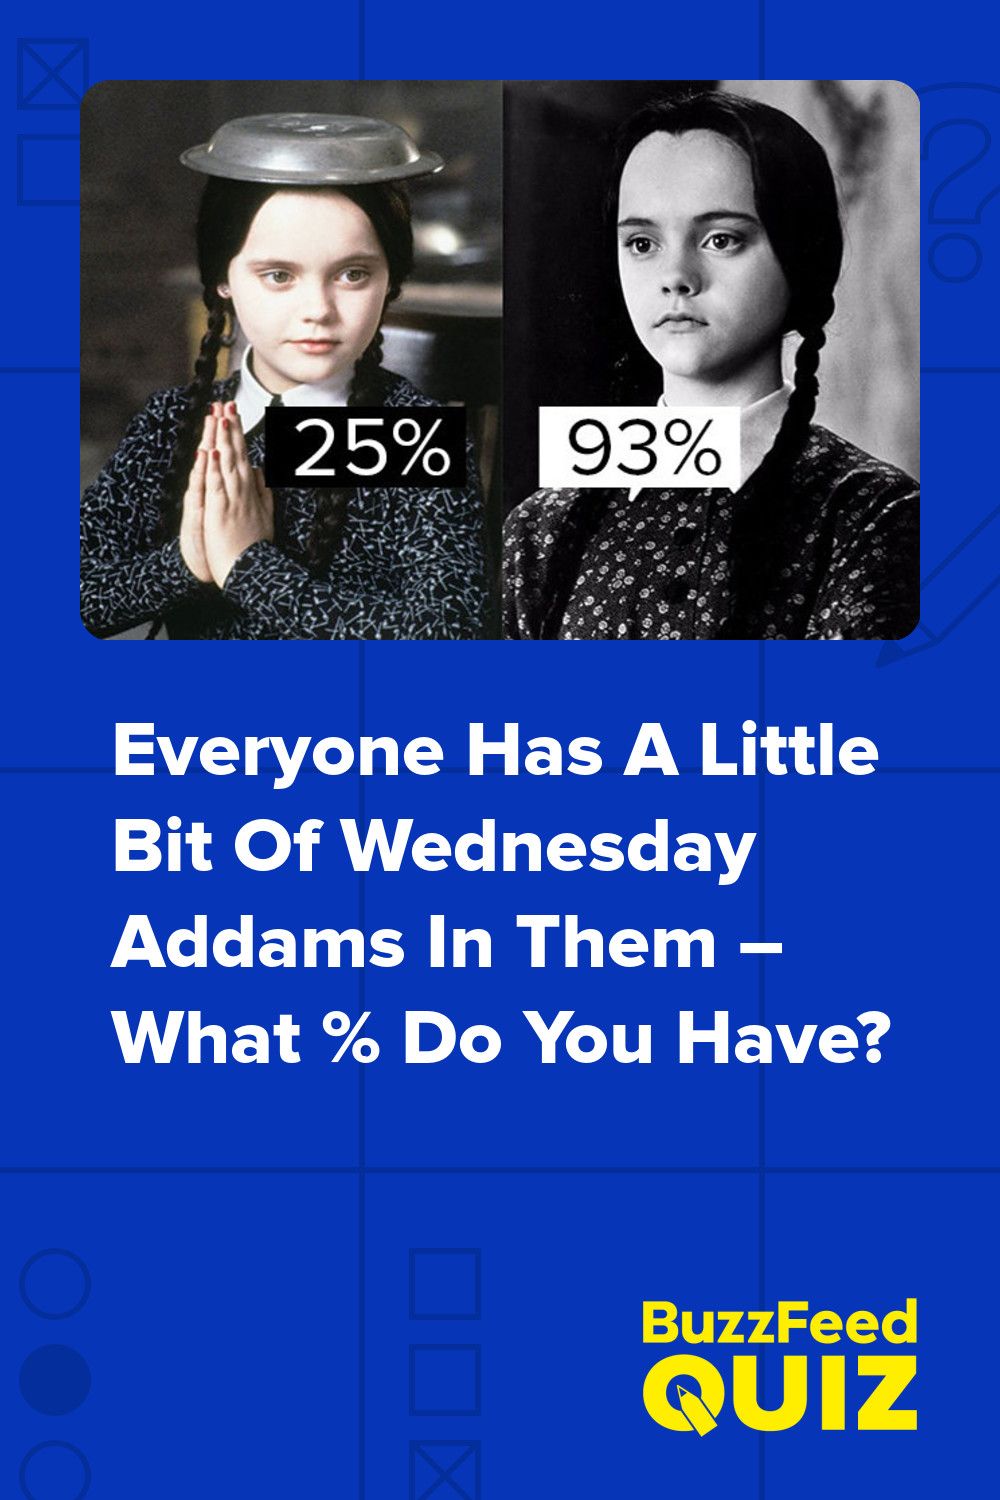 What's Your Wednesday Addams Percentage?